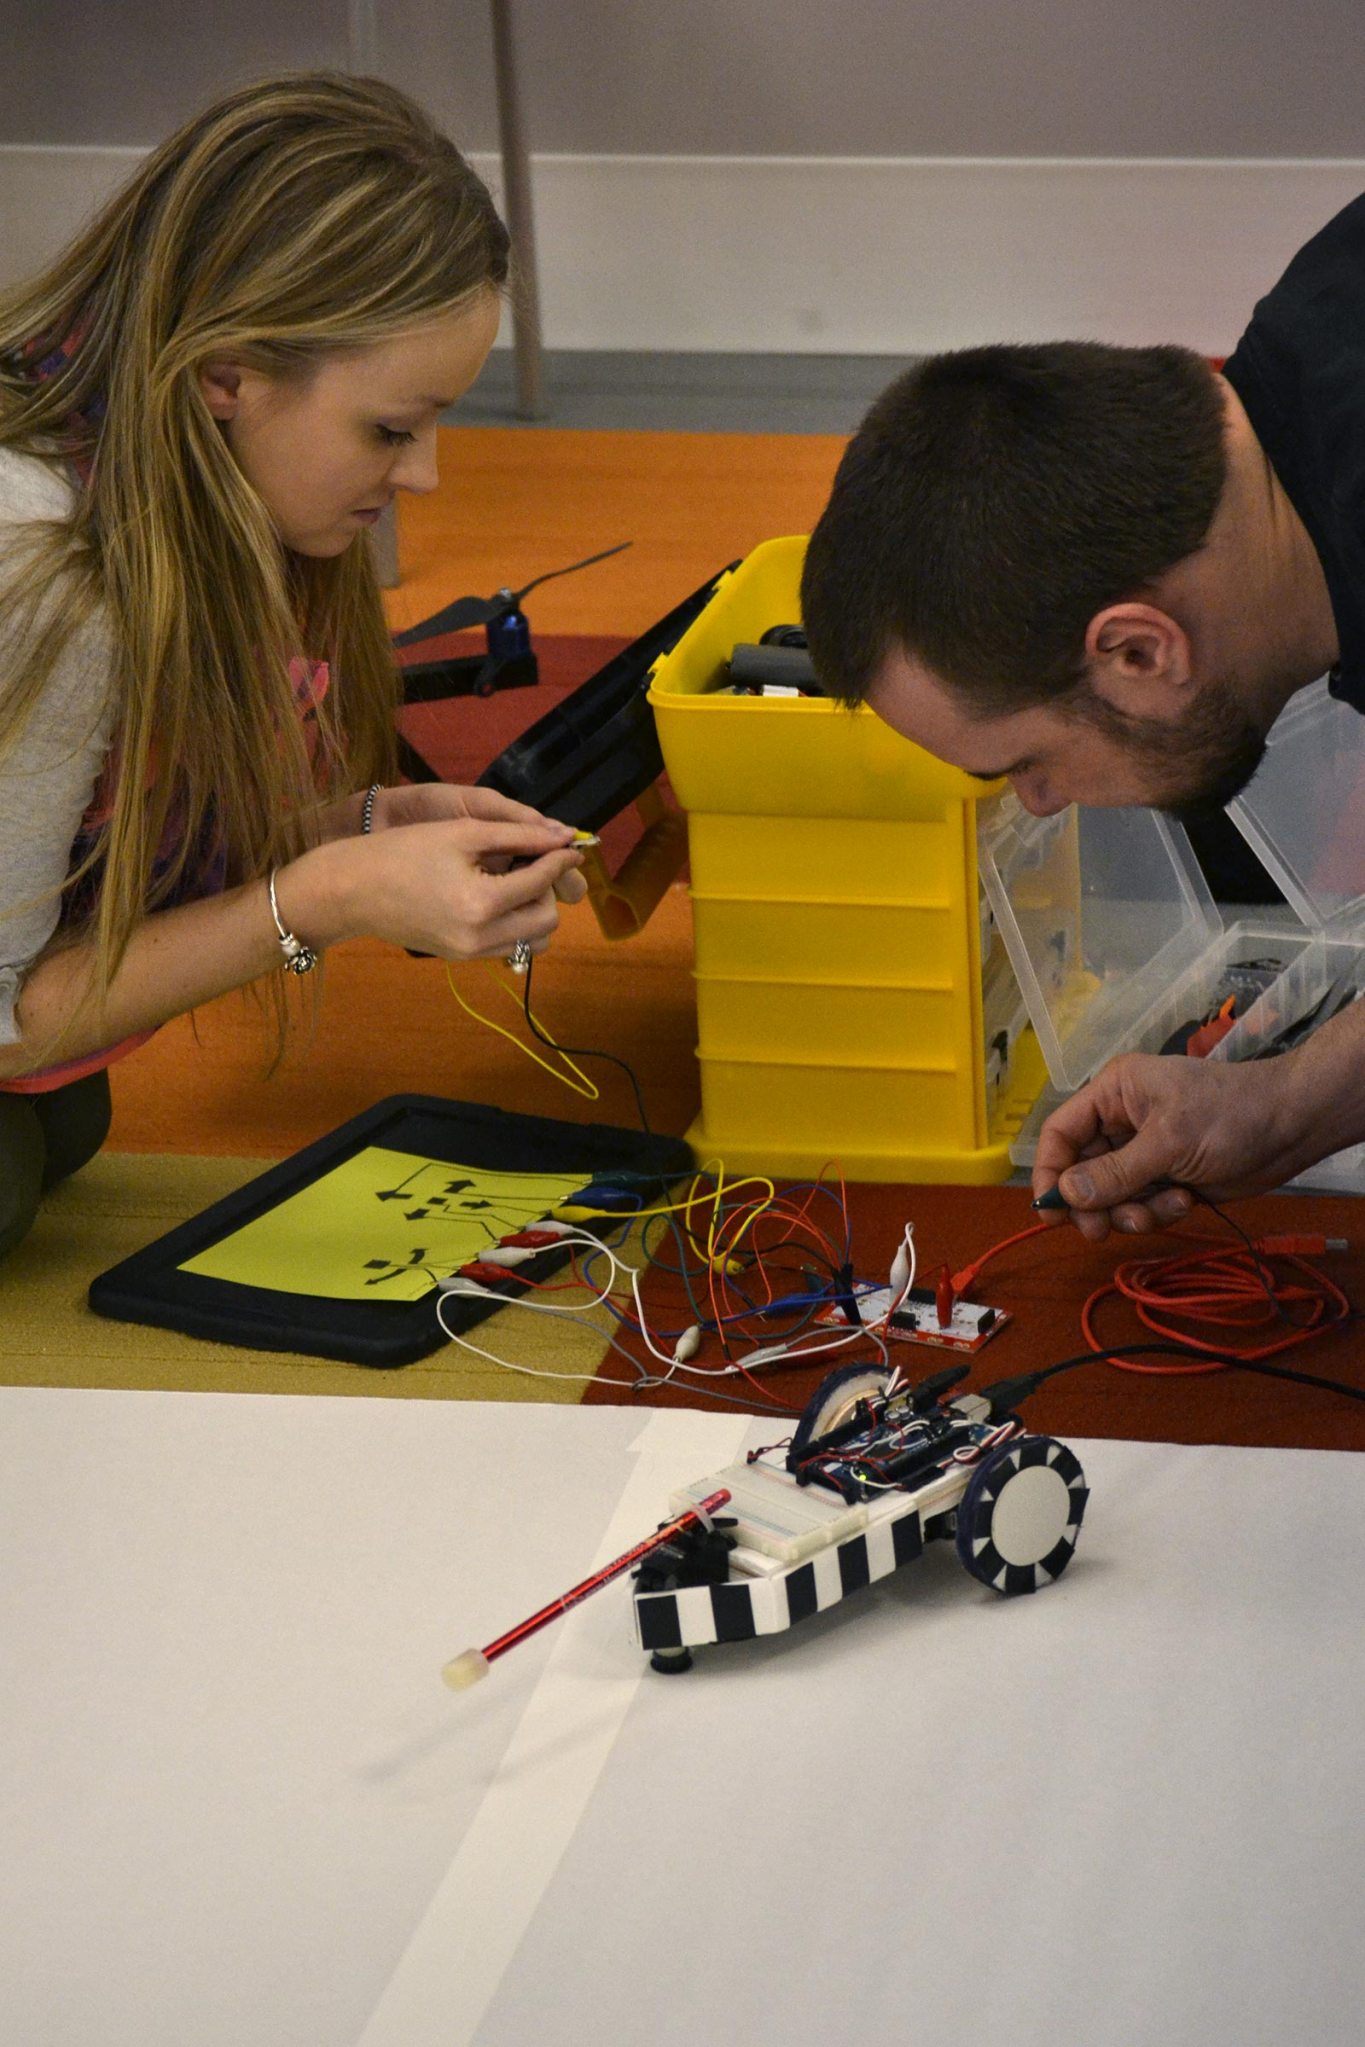 During the 2015 Space Apps Challenge event held at NASA Glenn, two participants work together on a challenging project.